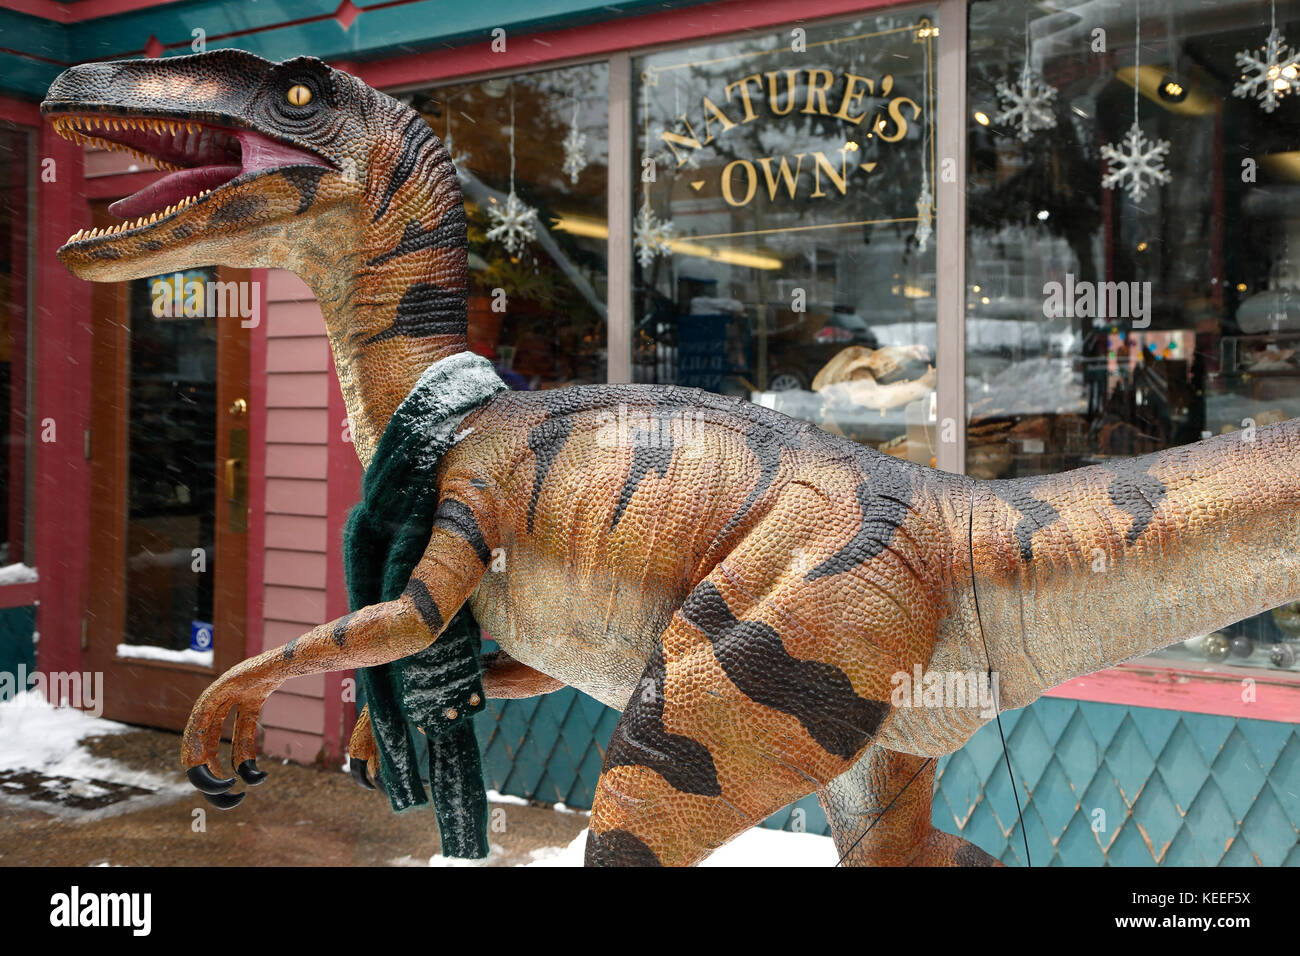 Dinosaur reproduction, Nature's Own (fossil and mineral store), Breckenridge, Colorado USA Stock Photo